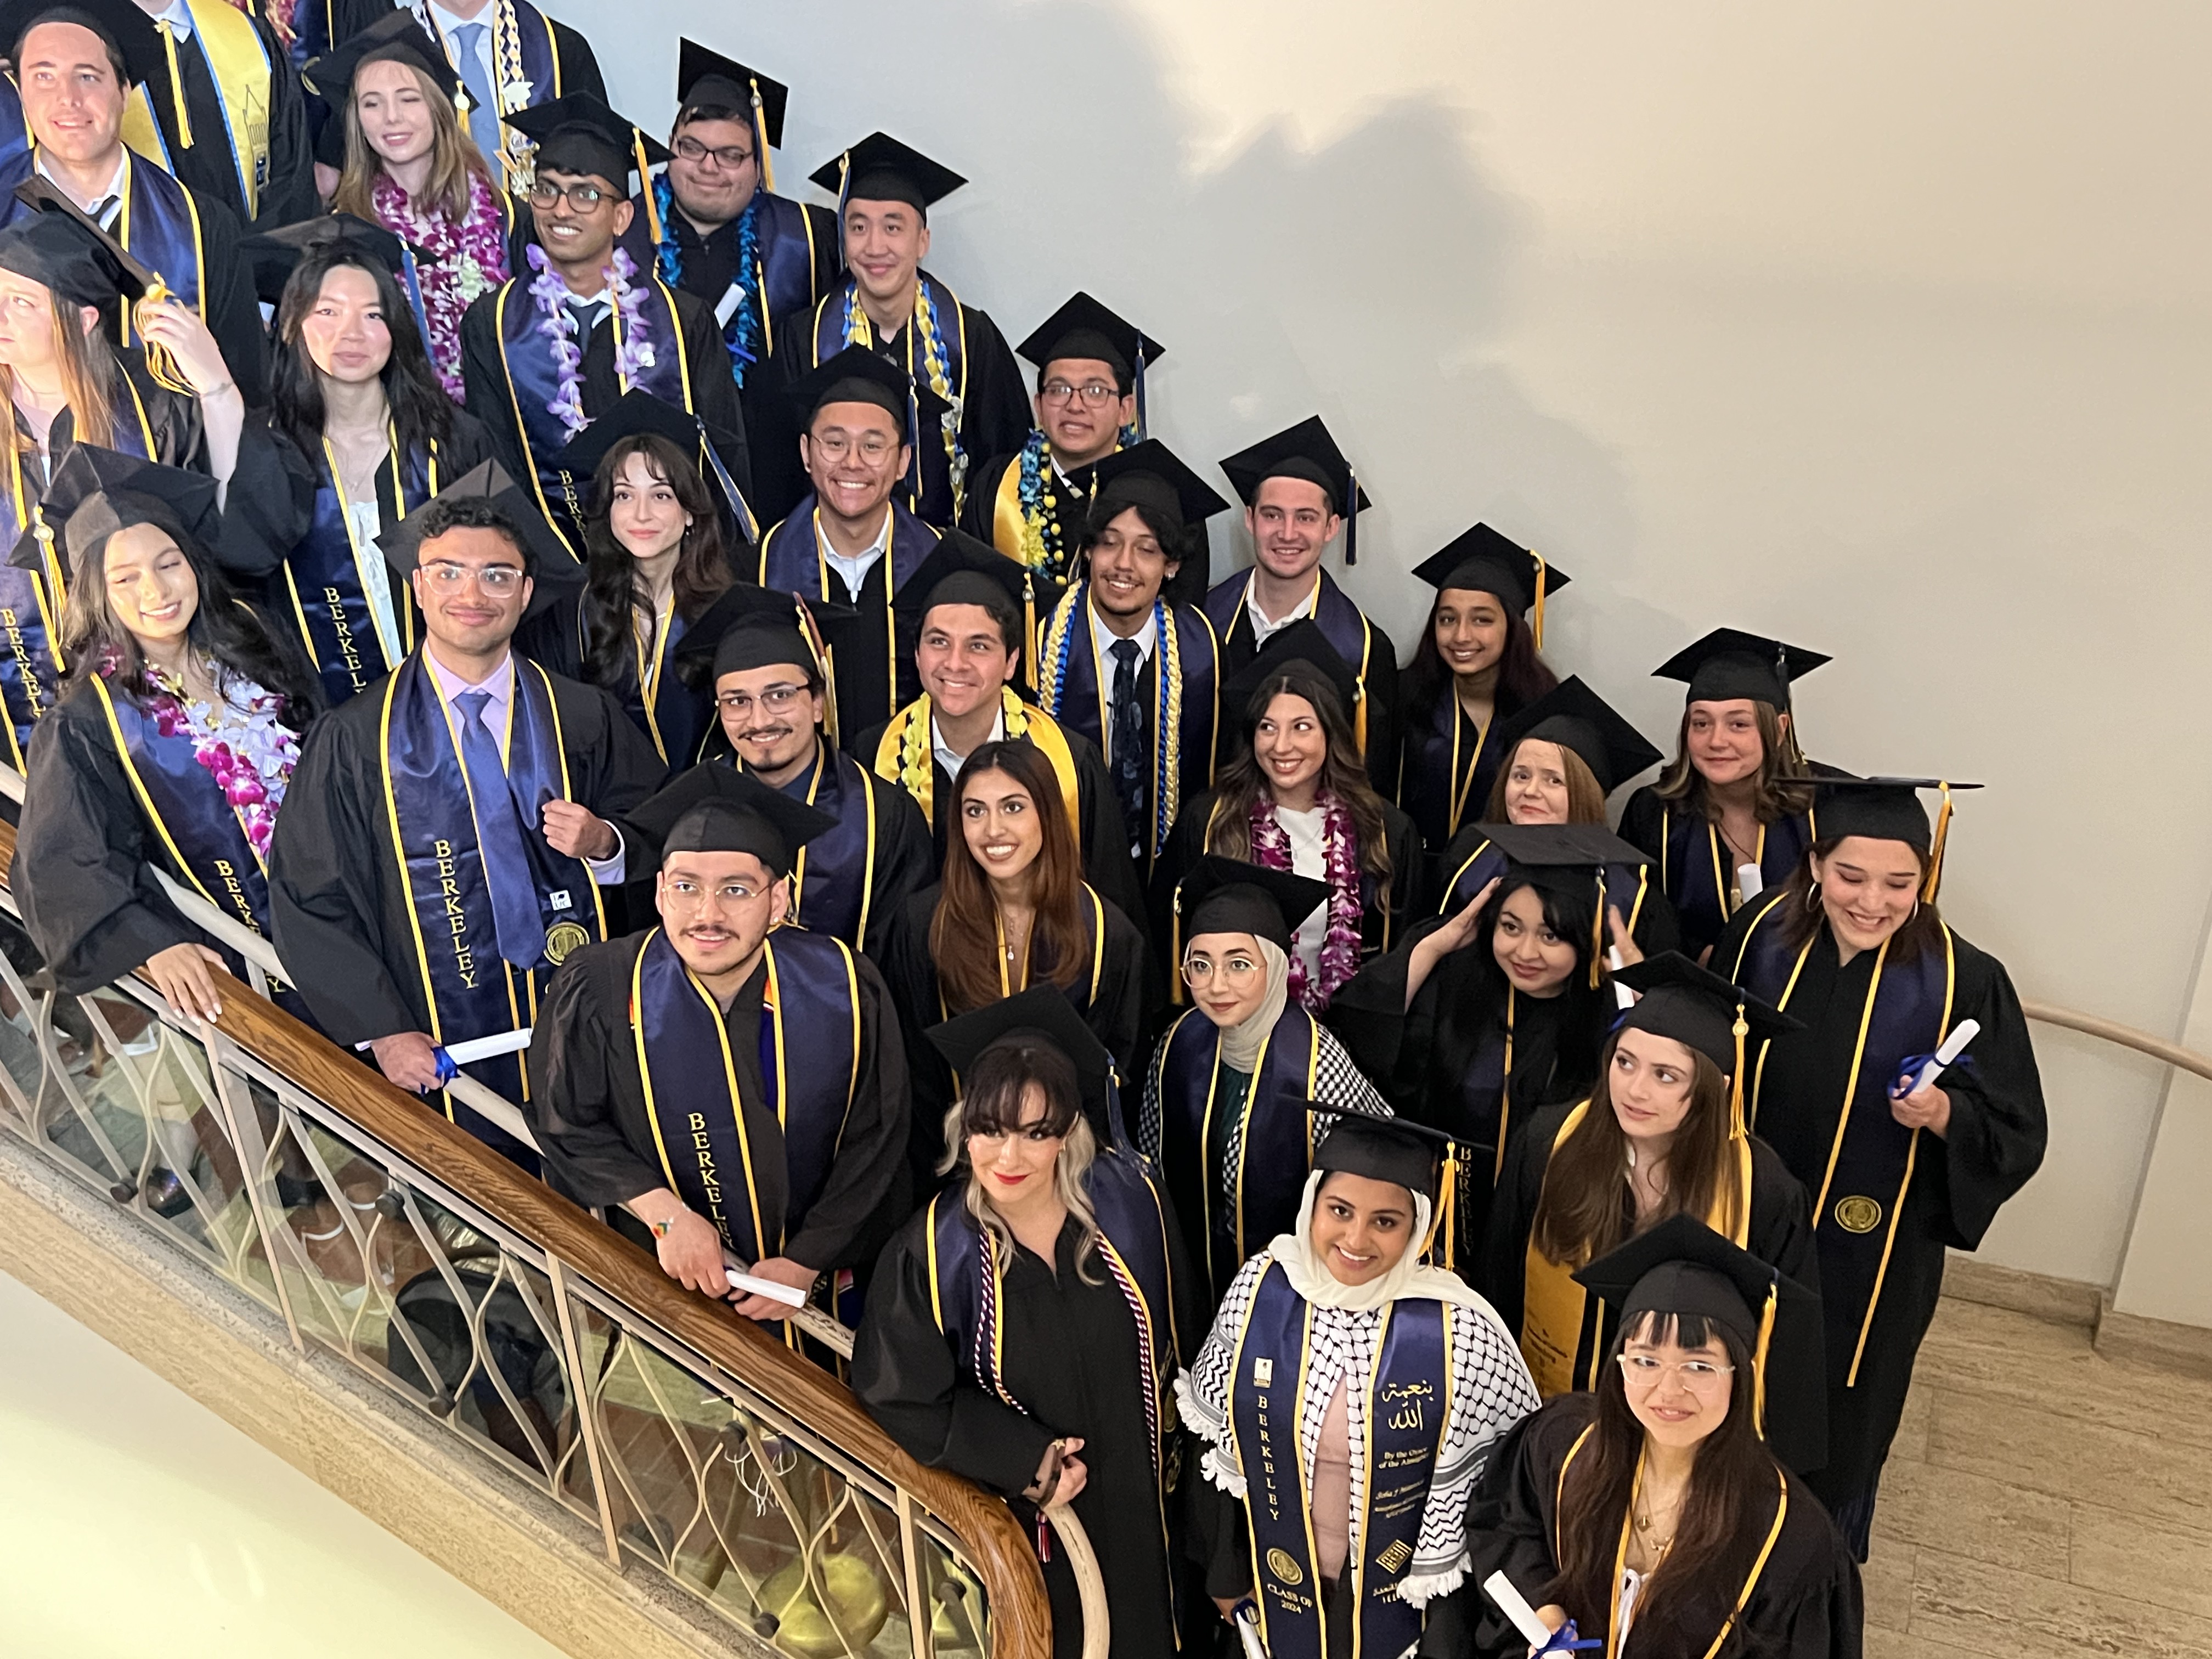 Graduate students standing in stairwell